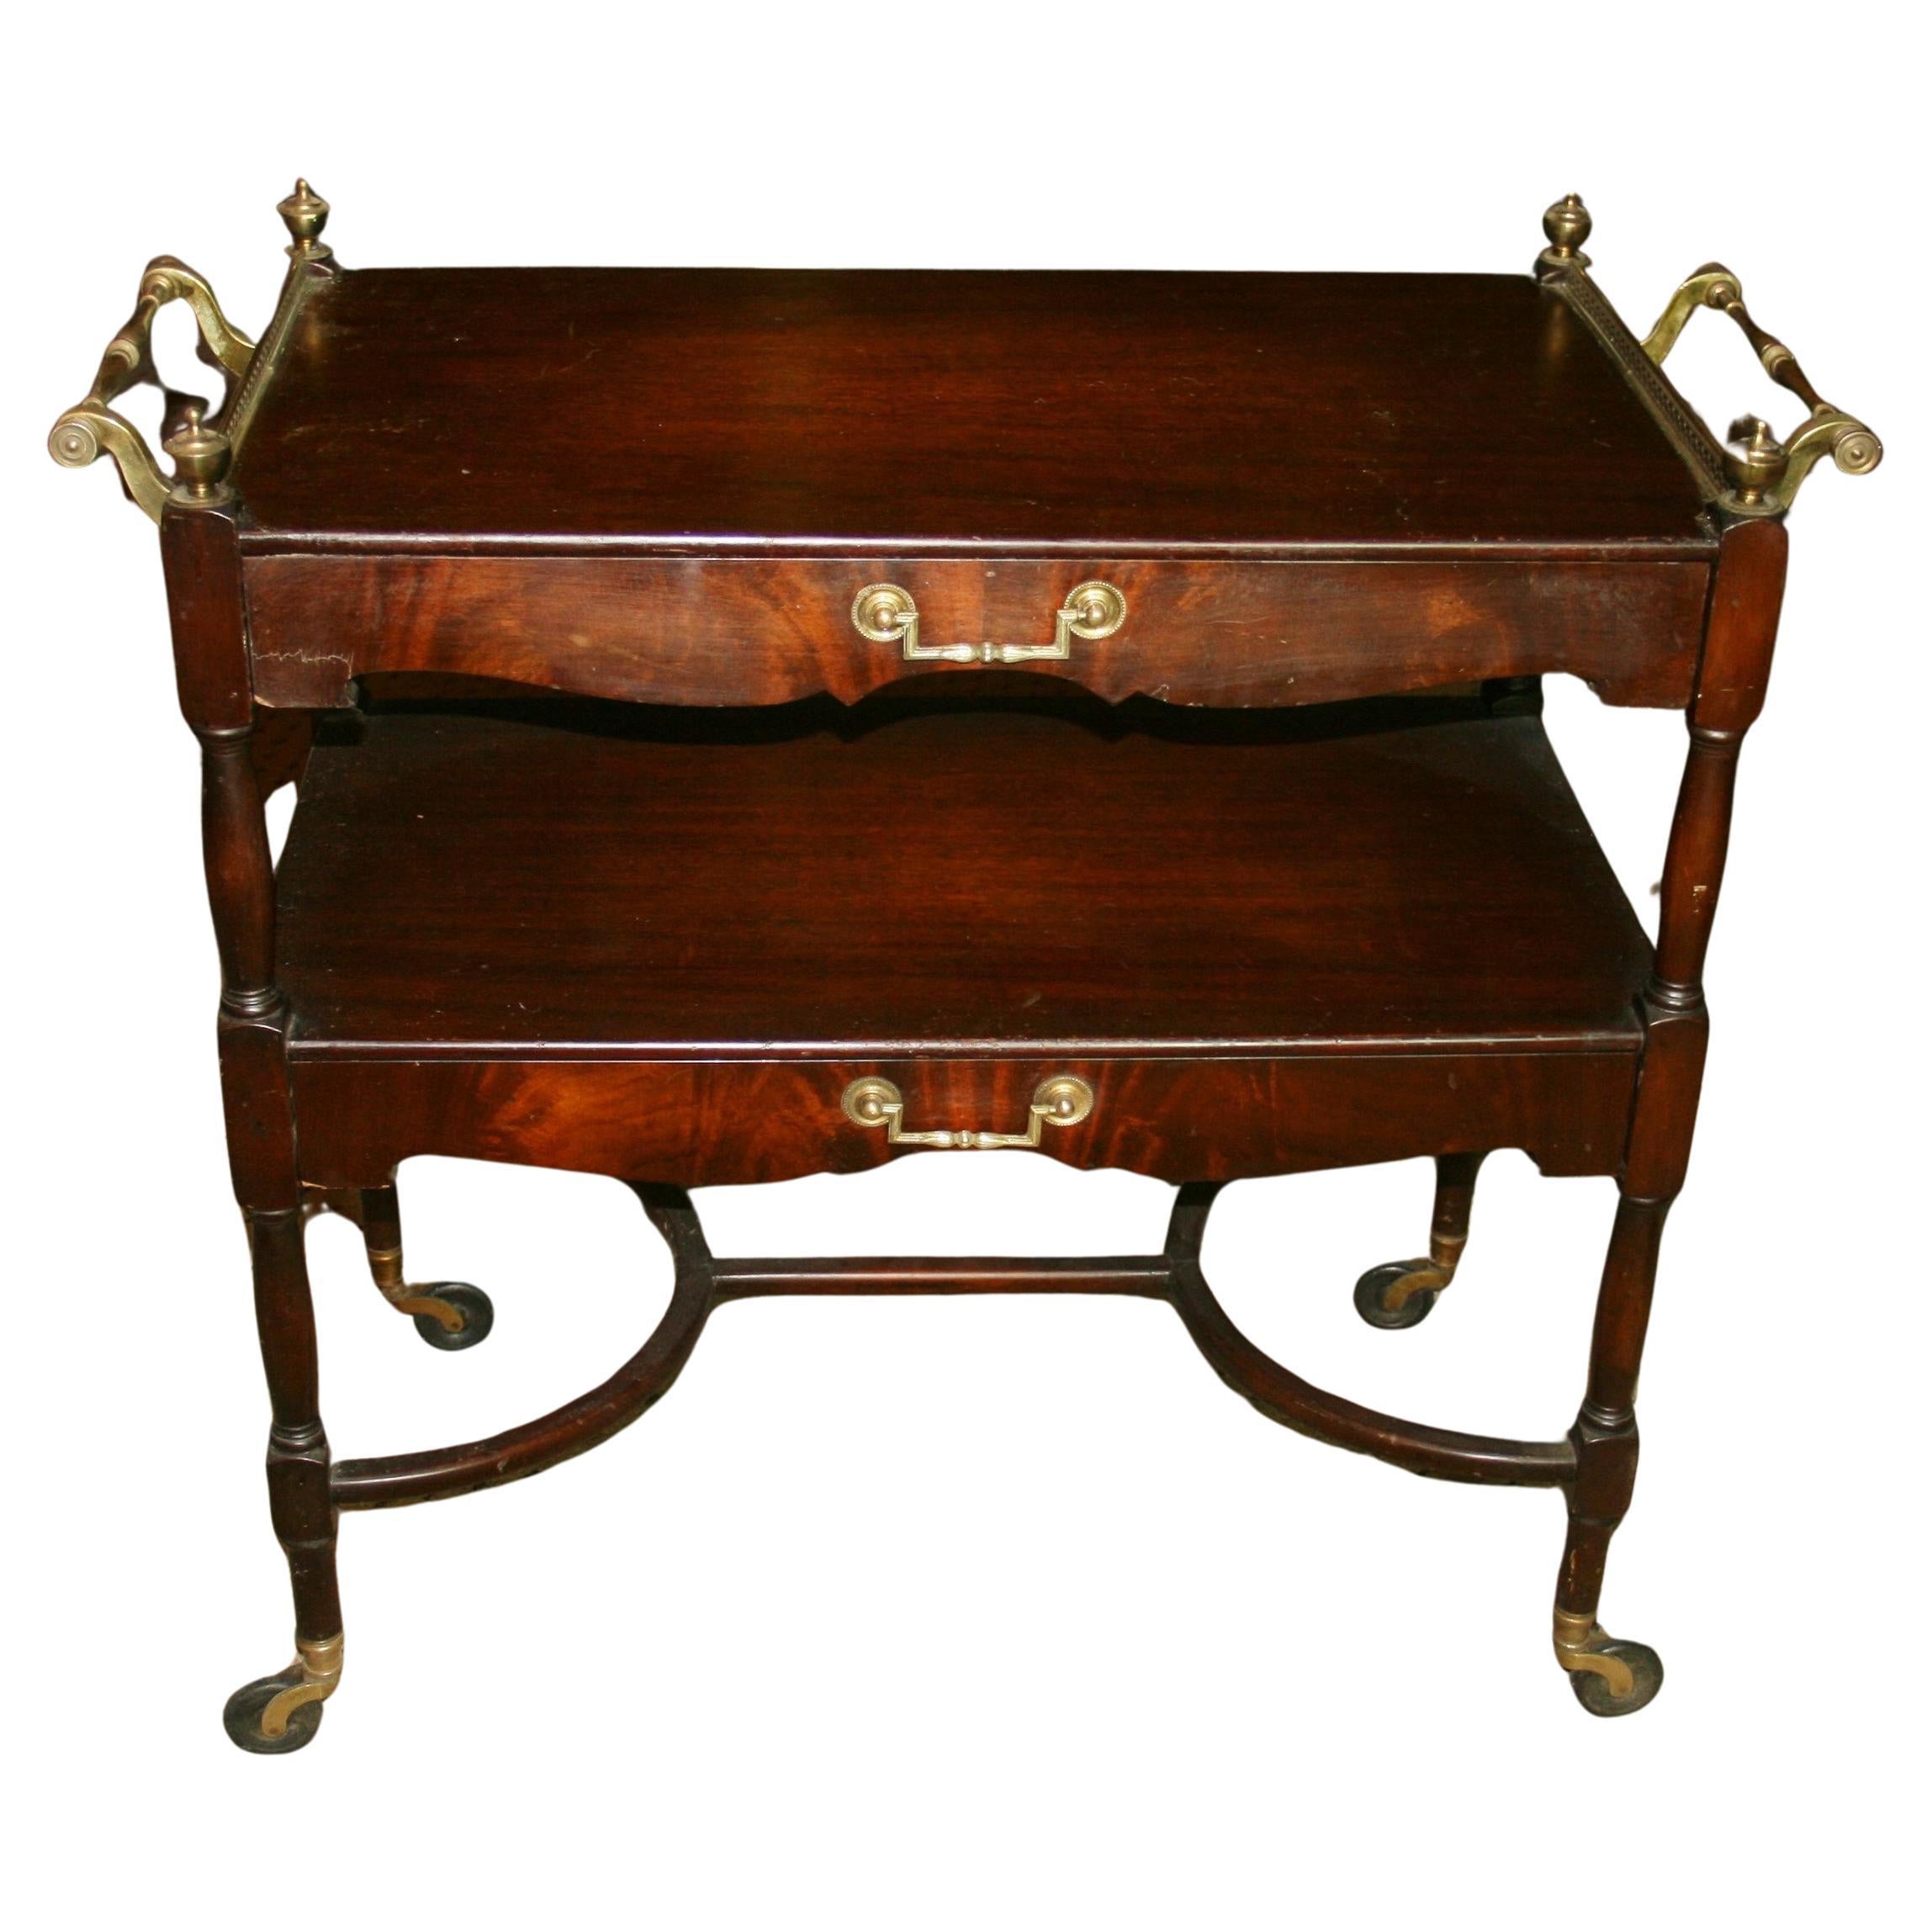 1533 Oversized English style wood and brass serving cart
Has 2 pull drawers
Top surface dimensions 17.5x31